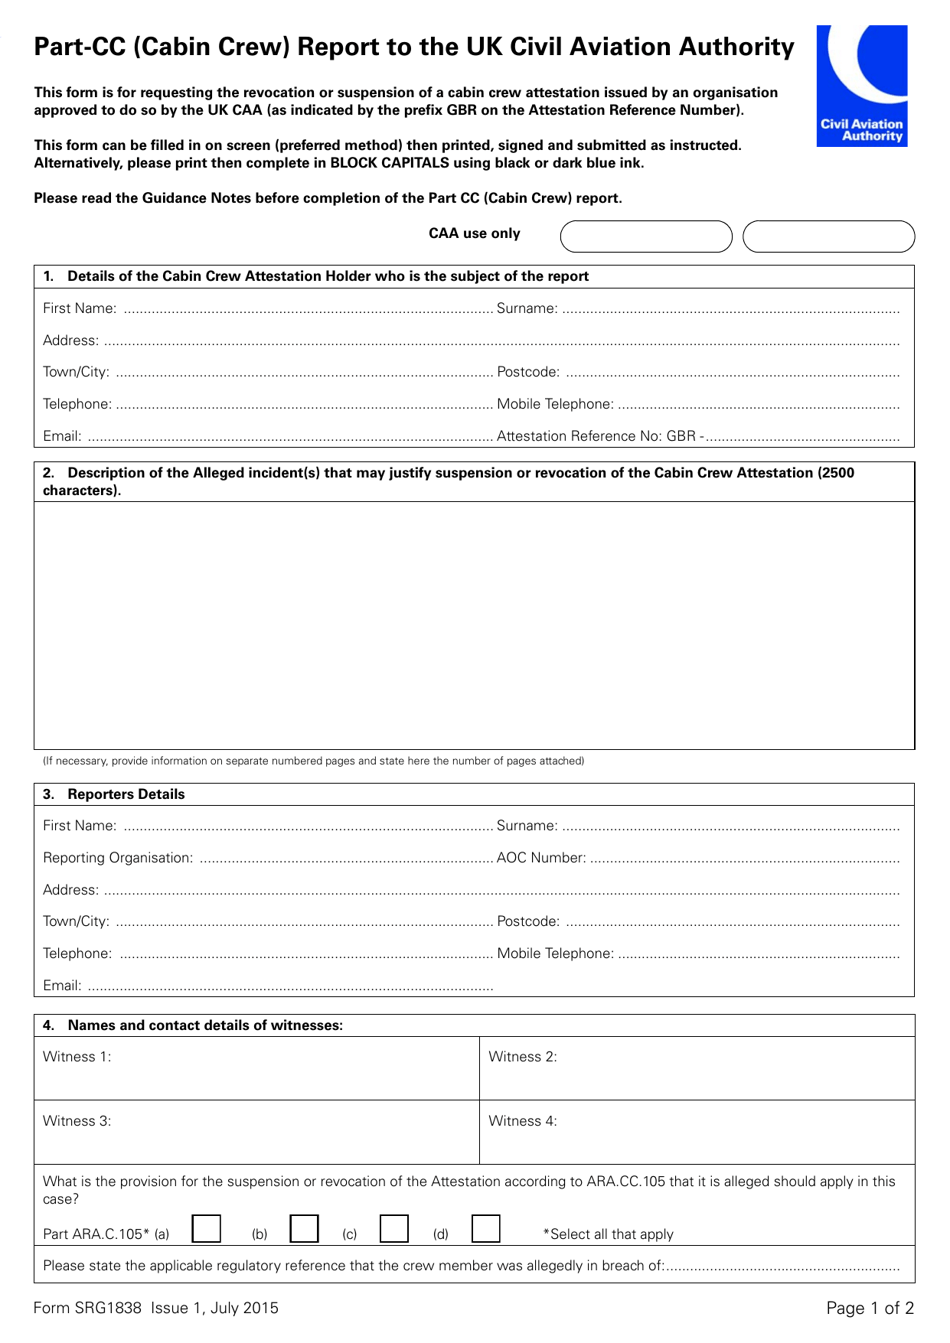 Form SRG1838 Part-Cc (Cabin Crew) Report to the UK Civil Aviation Authority - United Kingdom, Page 1